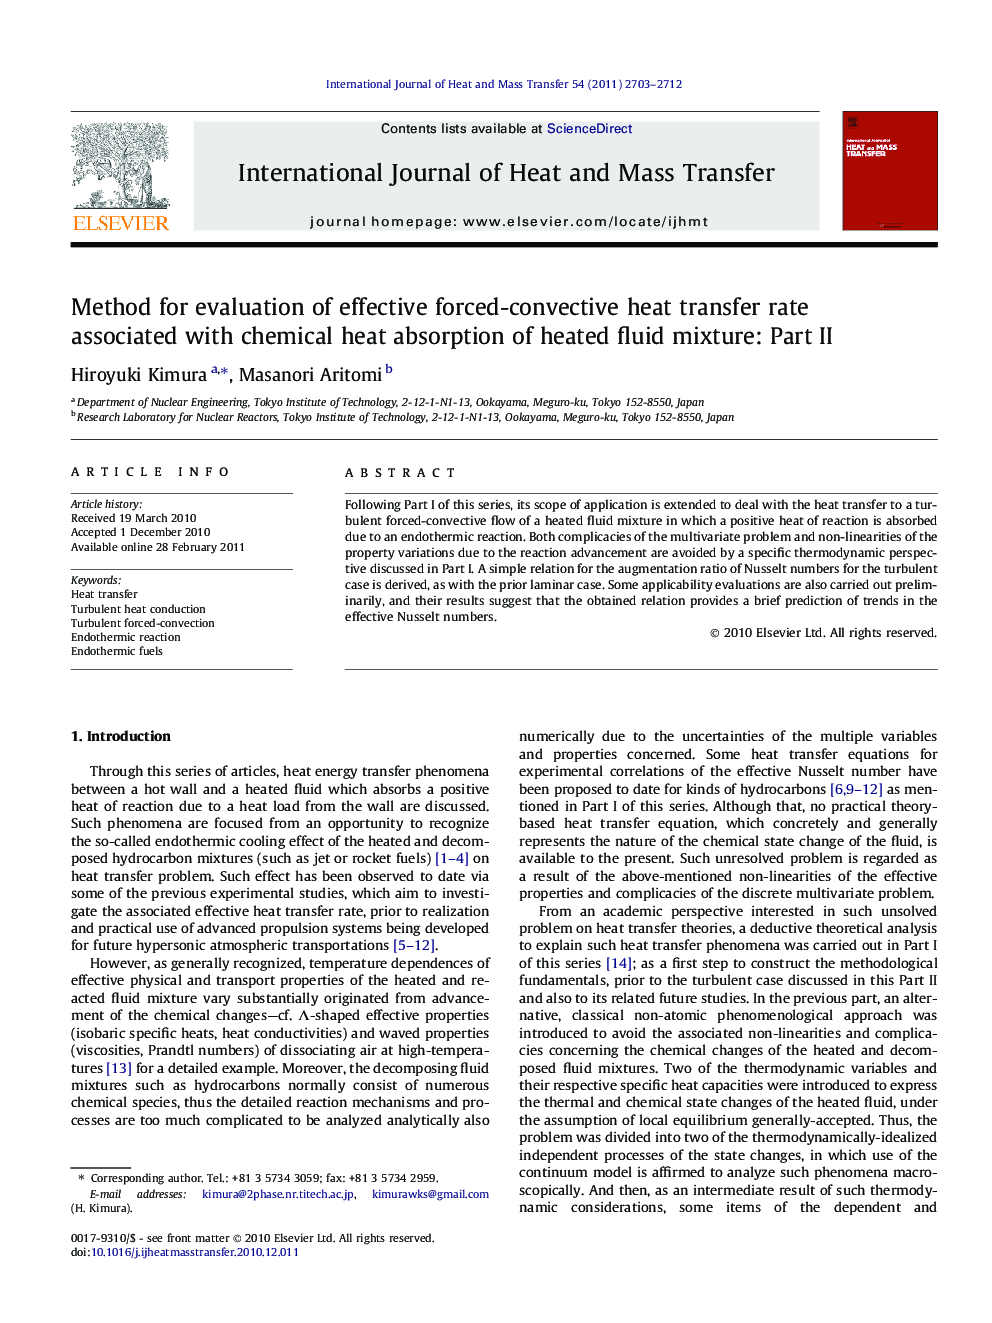 Method for evaluation of effective forced-convective heat transfer rate associated with chemical heat absorption of heated fluid mixture: Part II